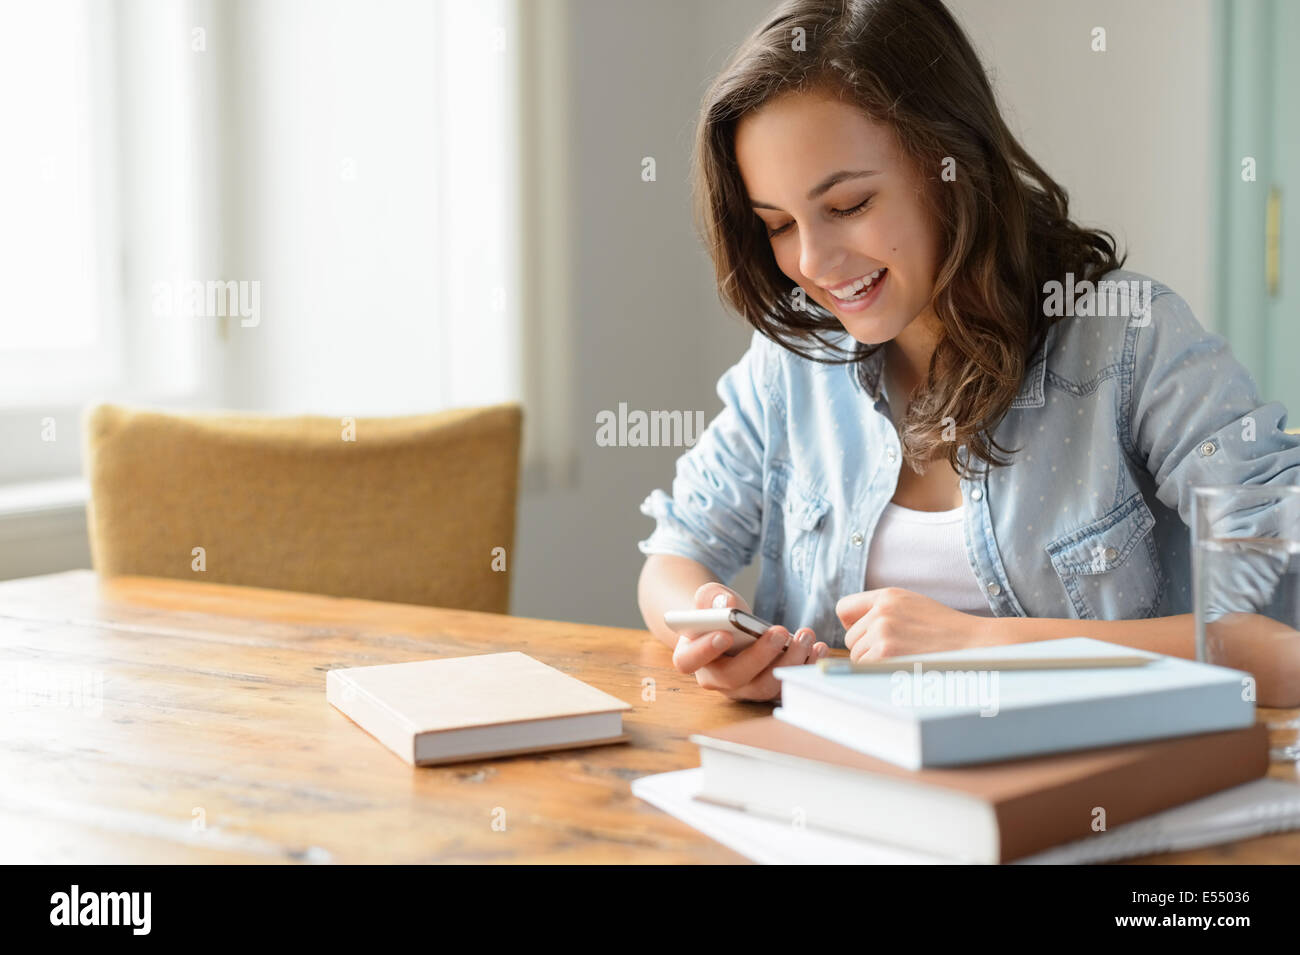 Teenage girl at home looking mobile phone smiling studying books Stock Photo